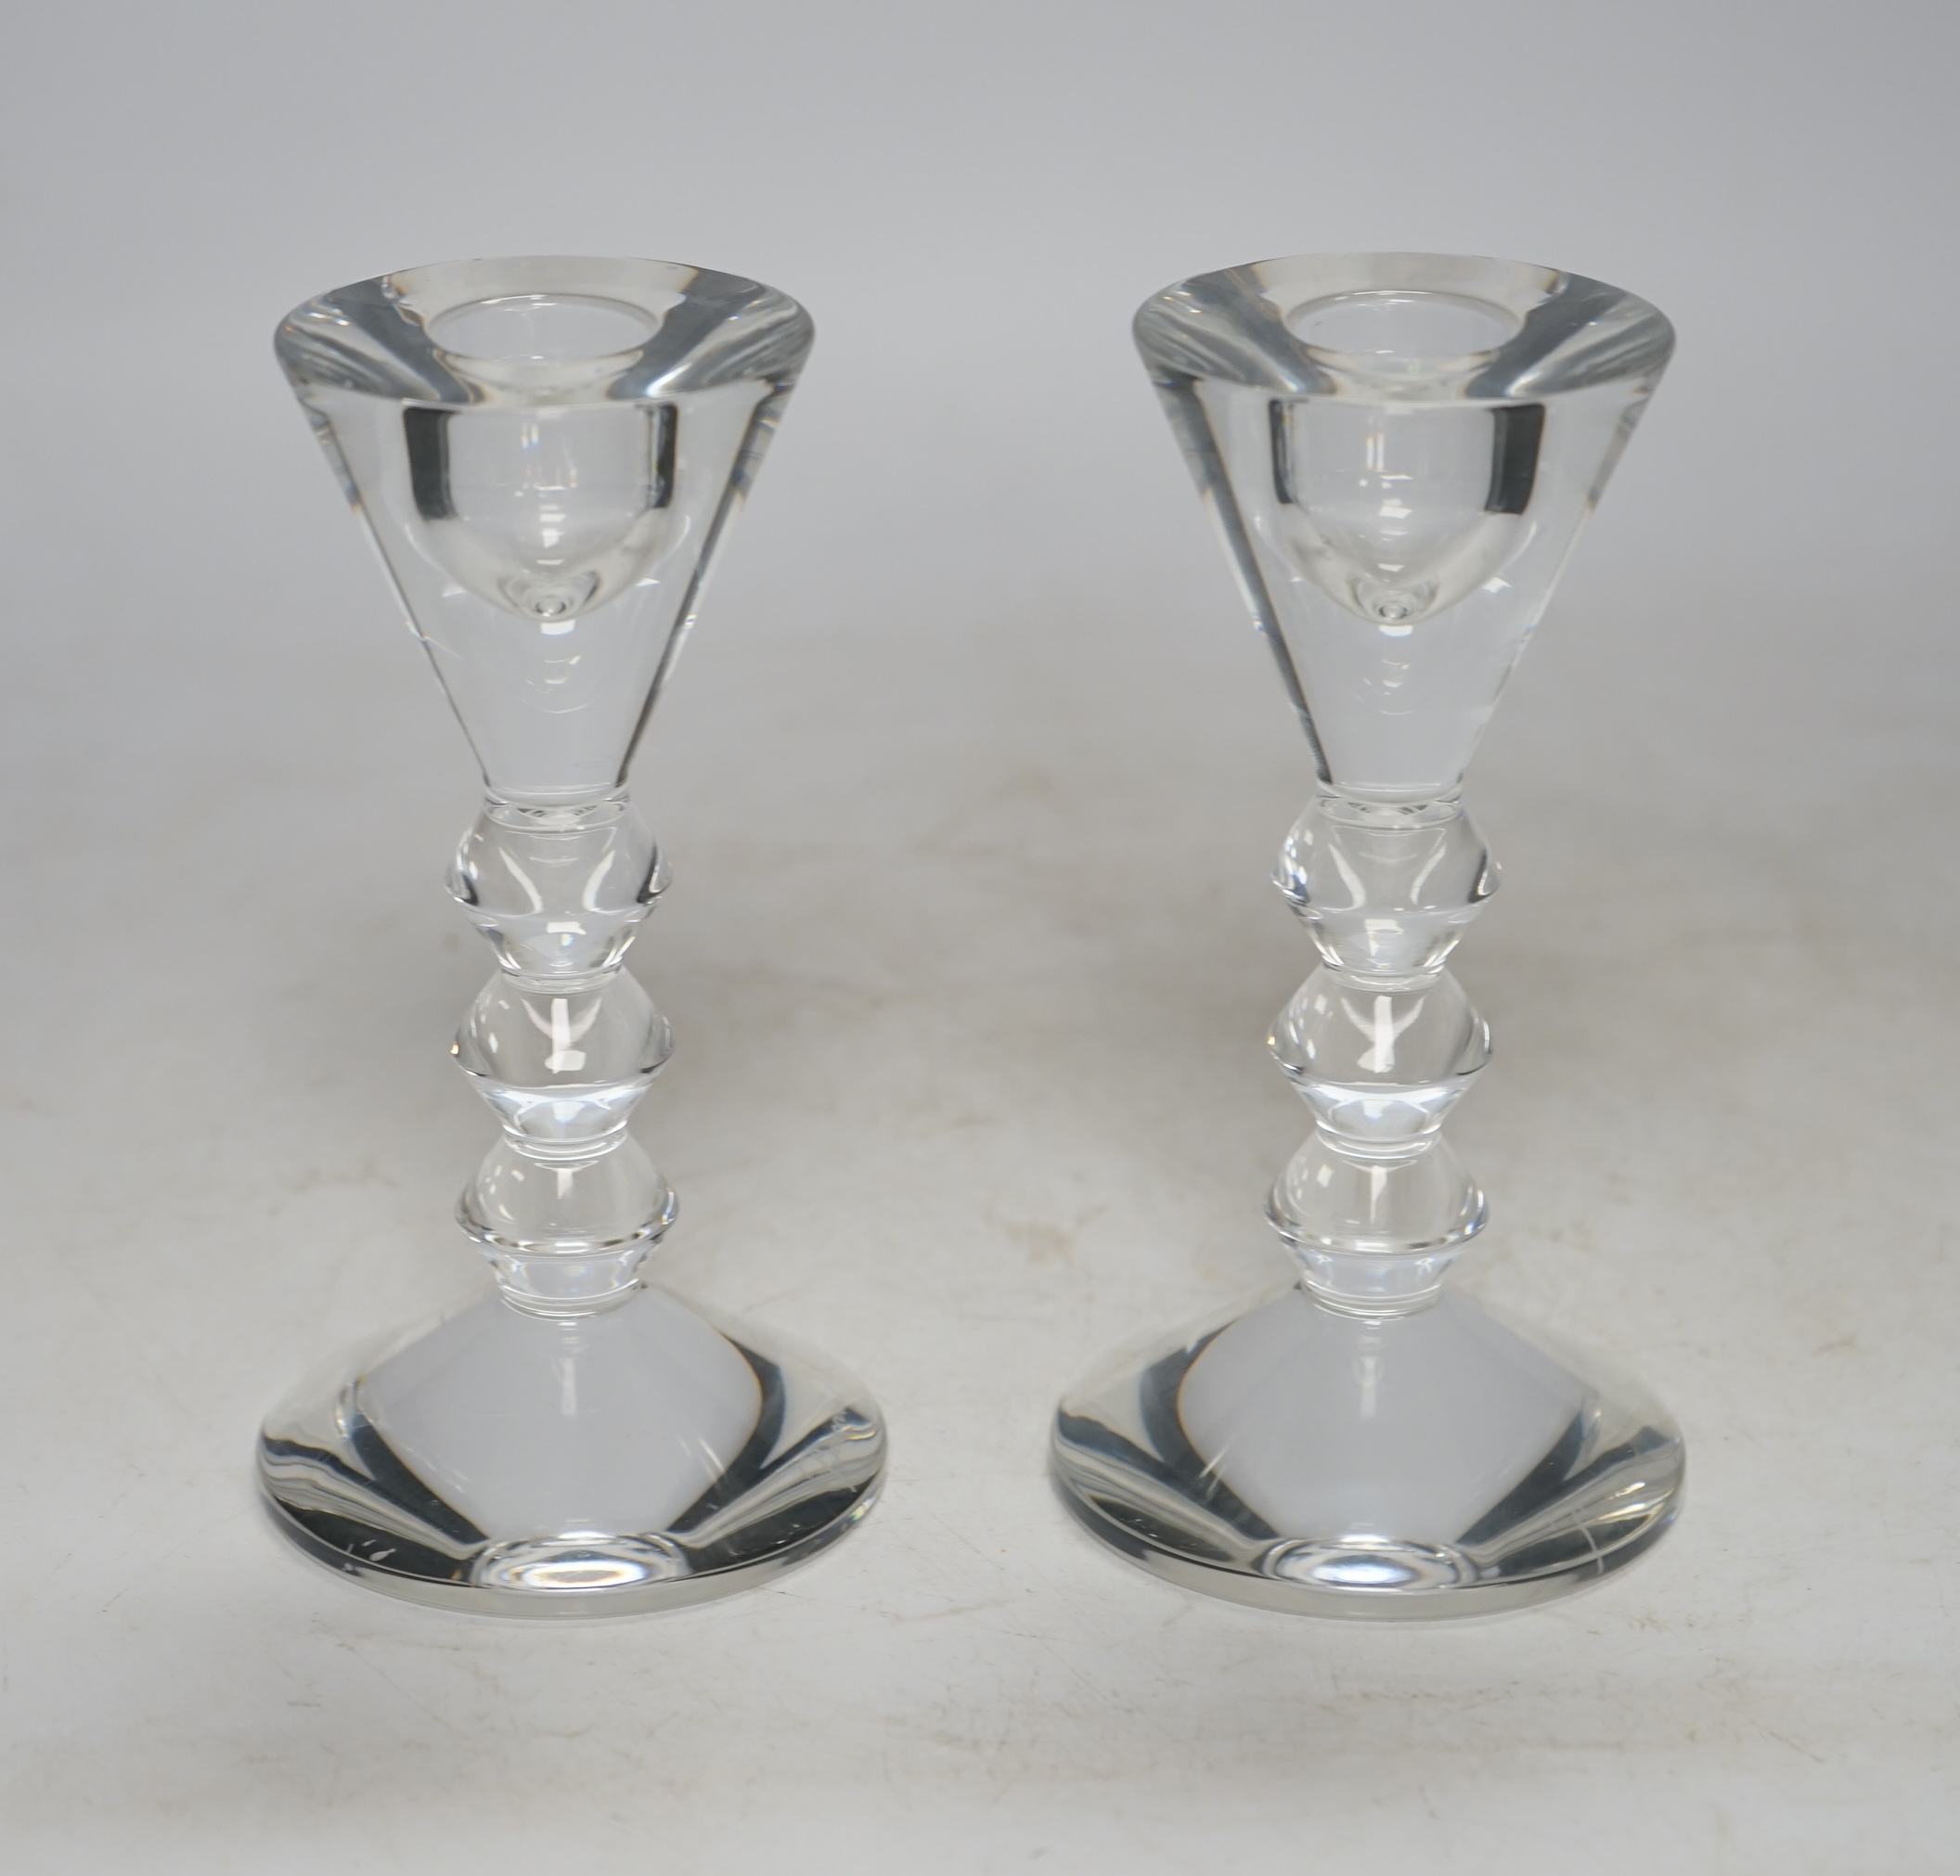 Two boxed Baccarat glass candlesticks, 13cm high. Condition - good